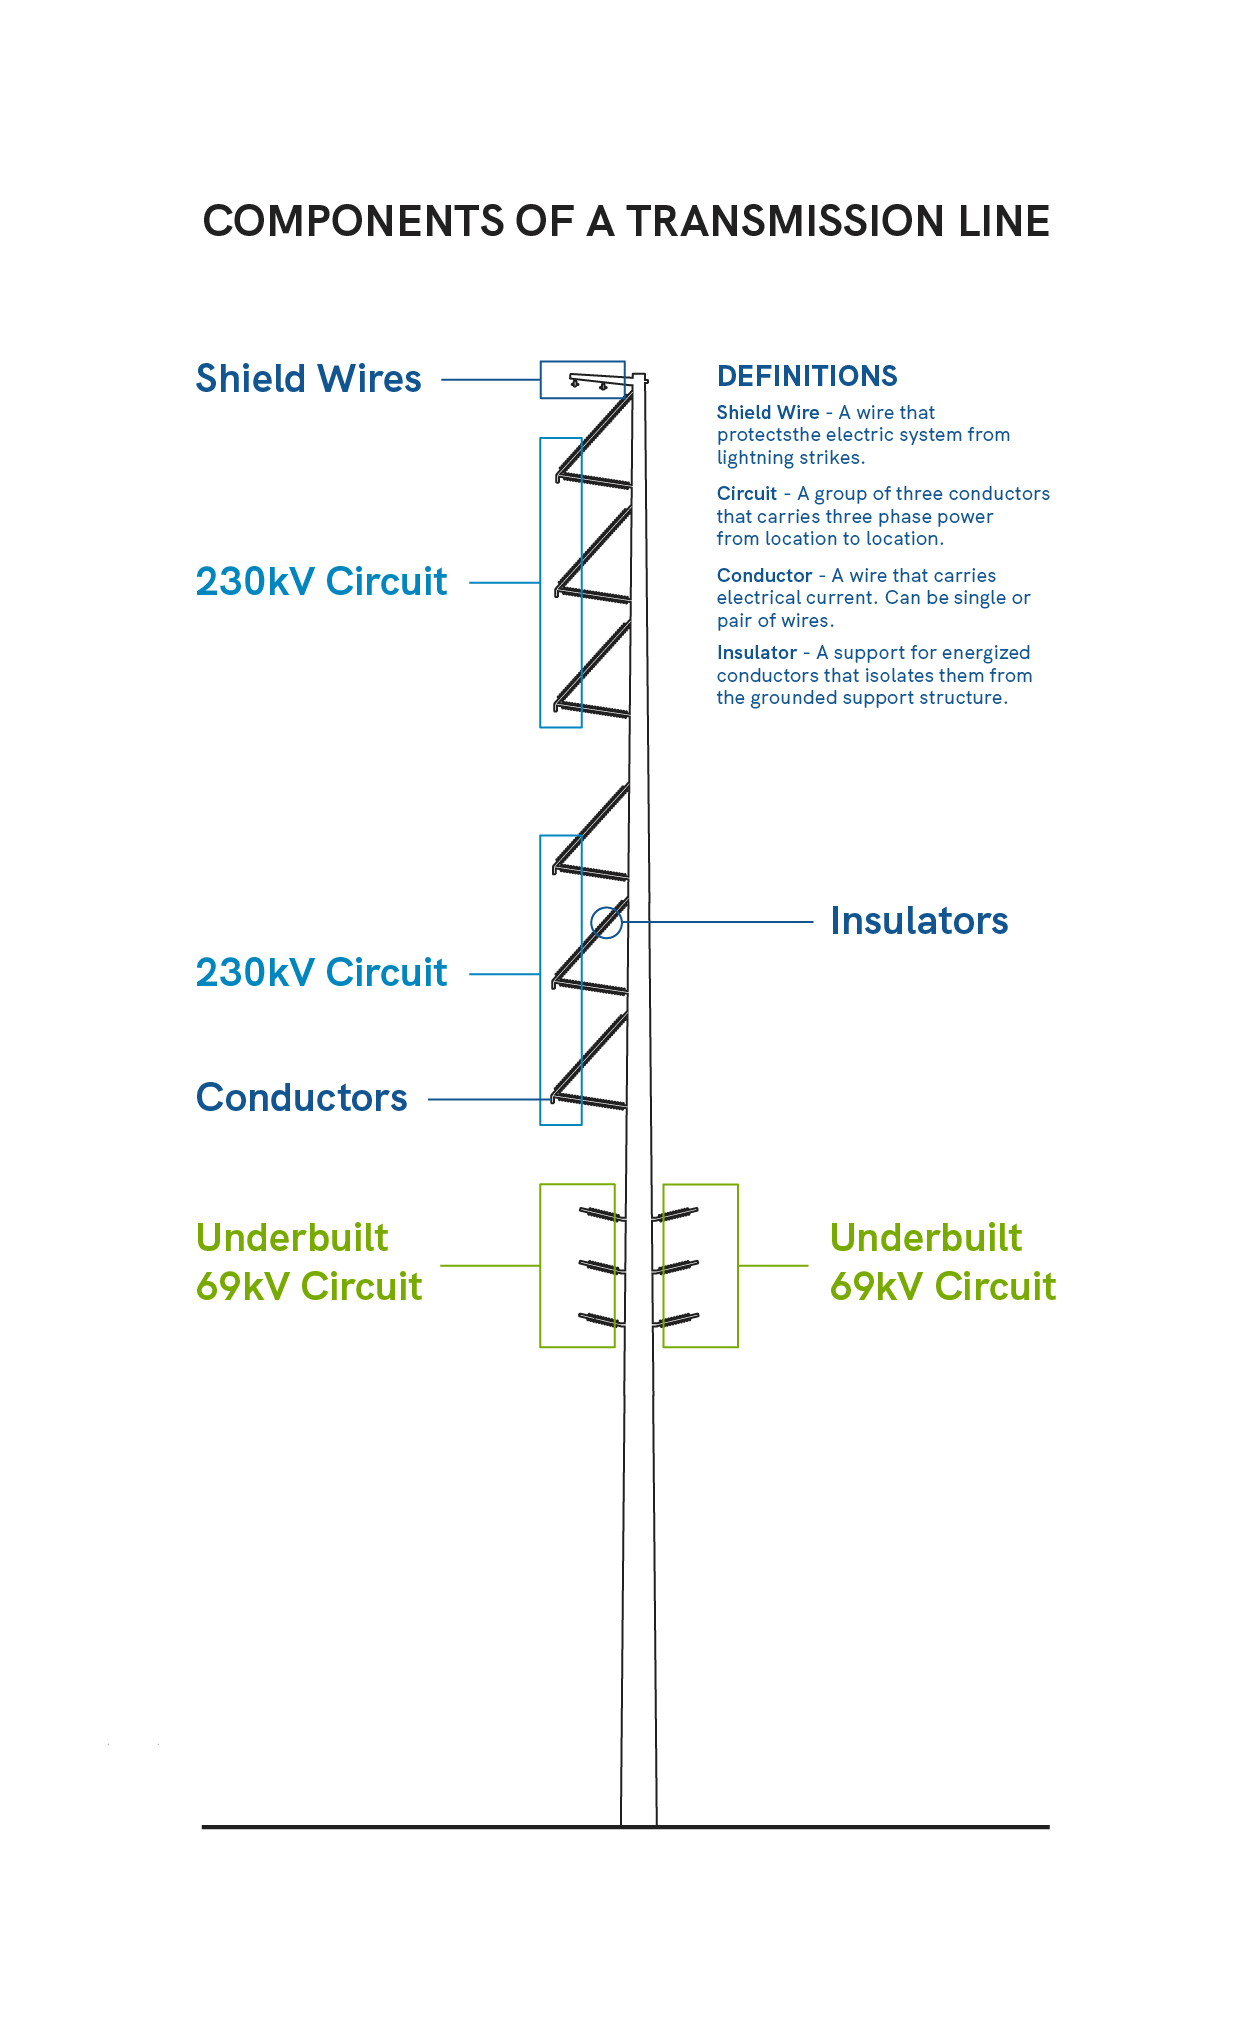 Components of a transmission line